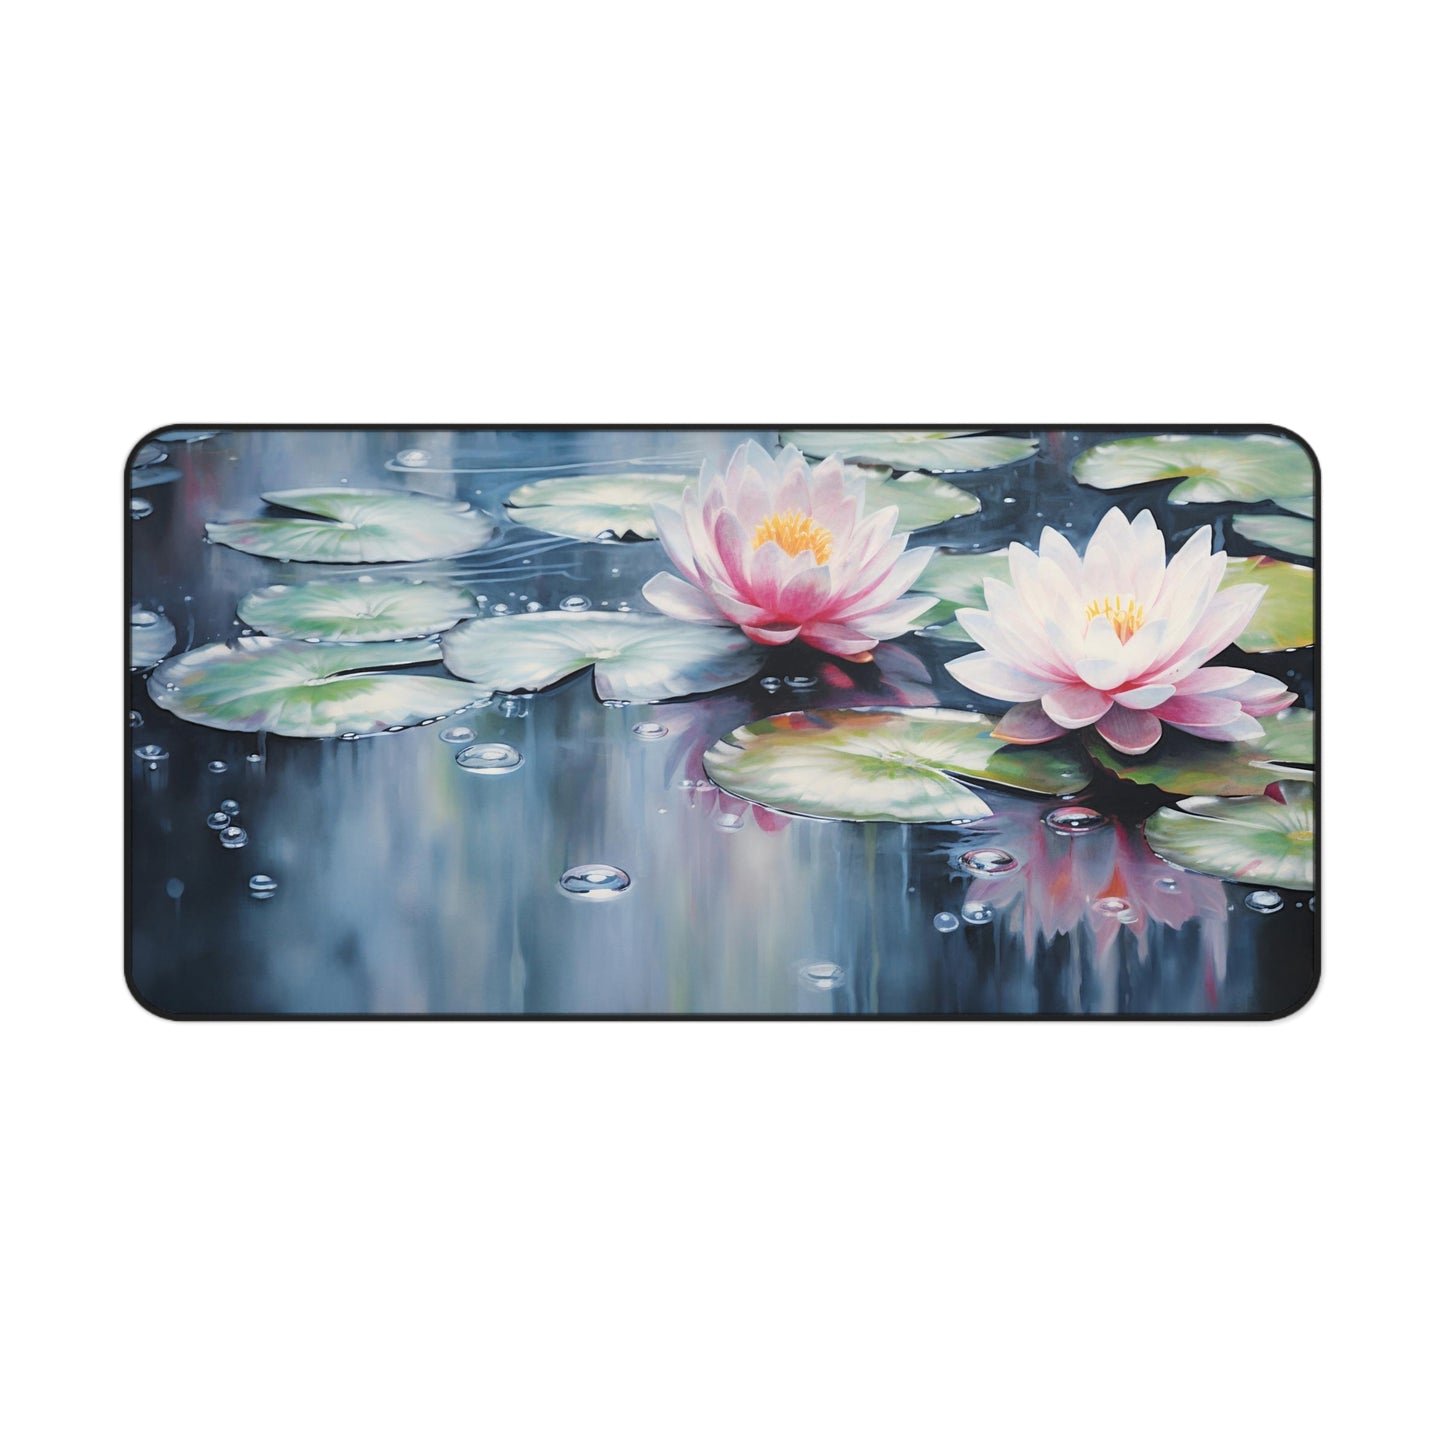 Water Lilies Desk Mat, Lily Pads Desk Pad, Lotus Flowers Keyboard Mat, Pond Water Lily Mouse Pad, Serene Workspace, Desk Accessory